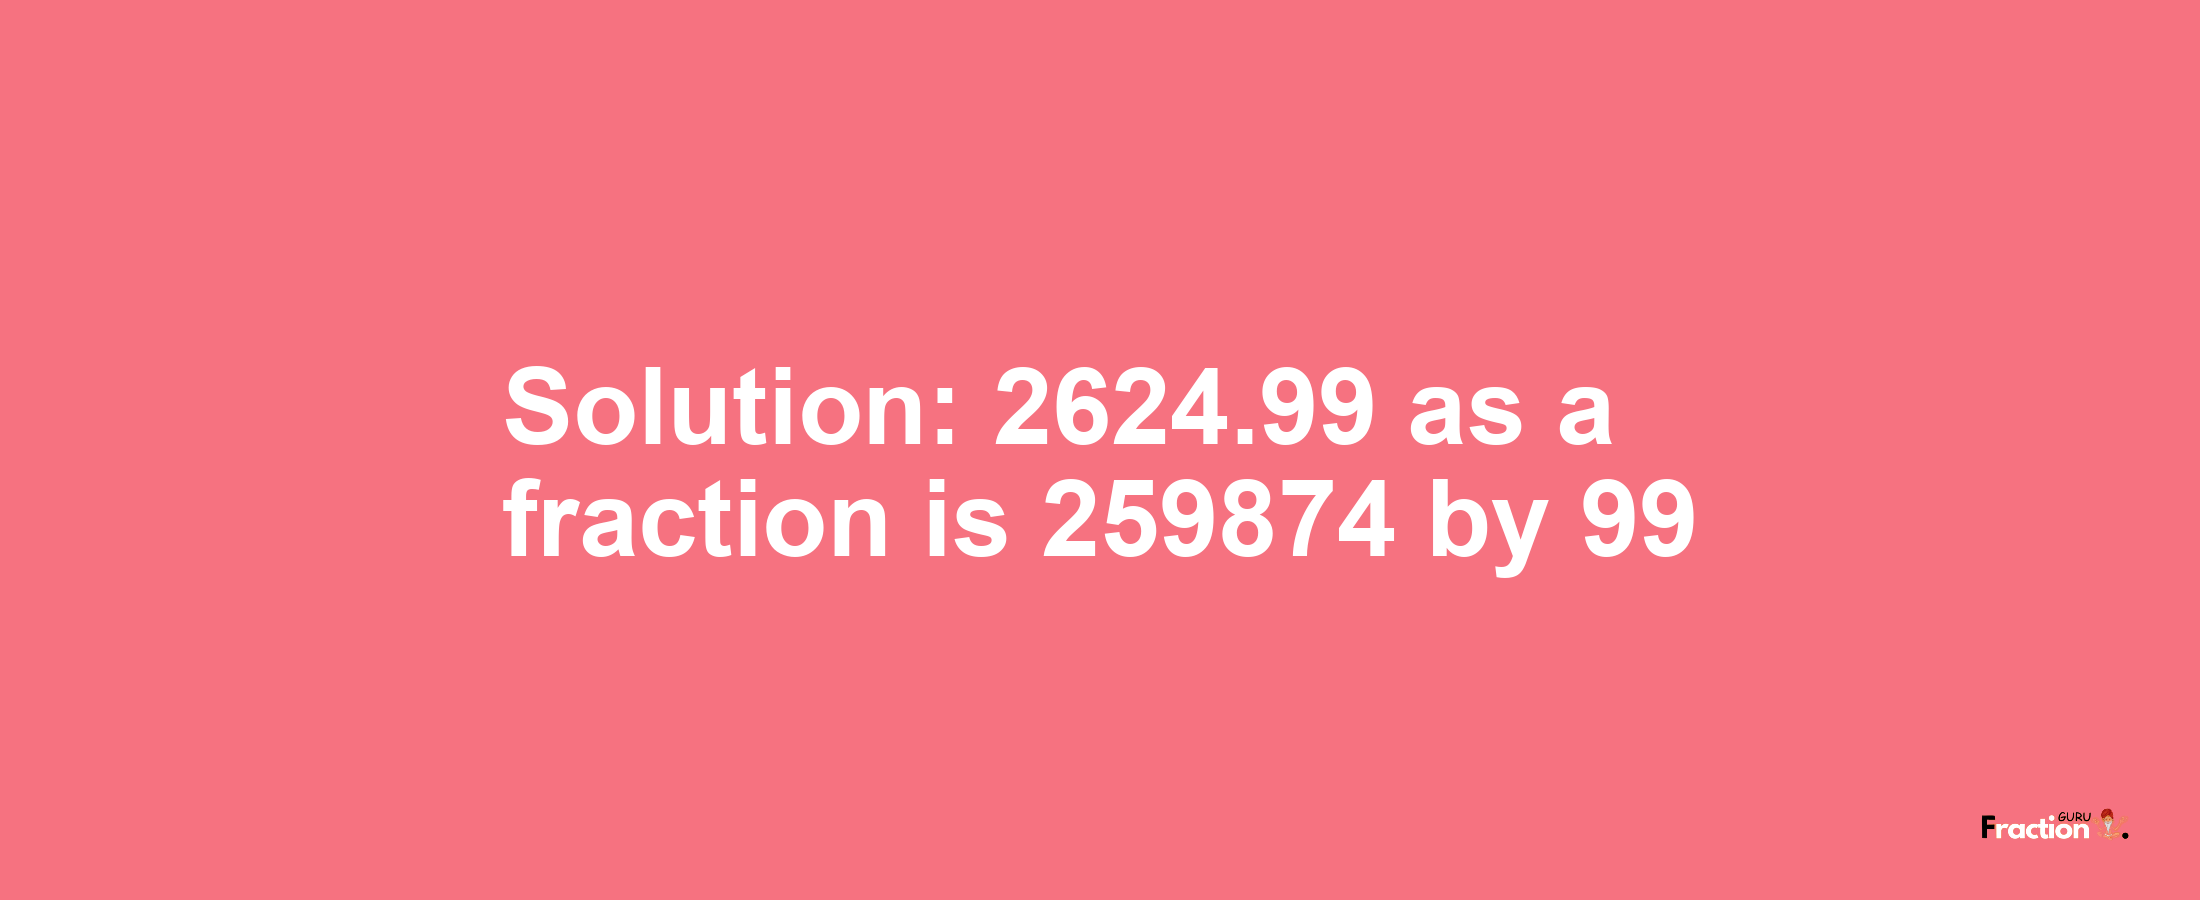 Solution:2624.99 as a fraction is 259874/99